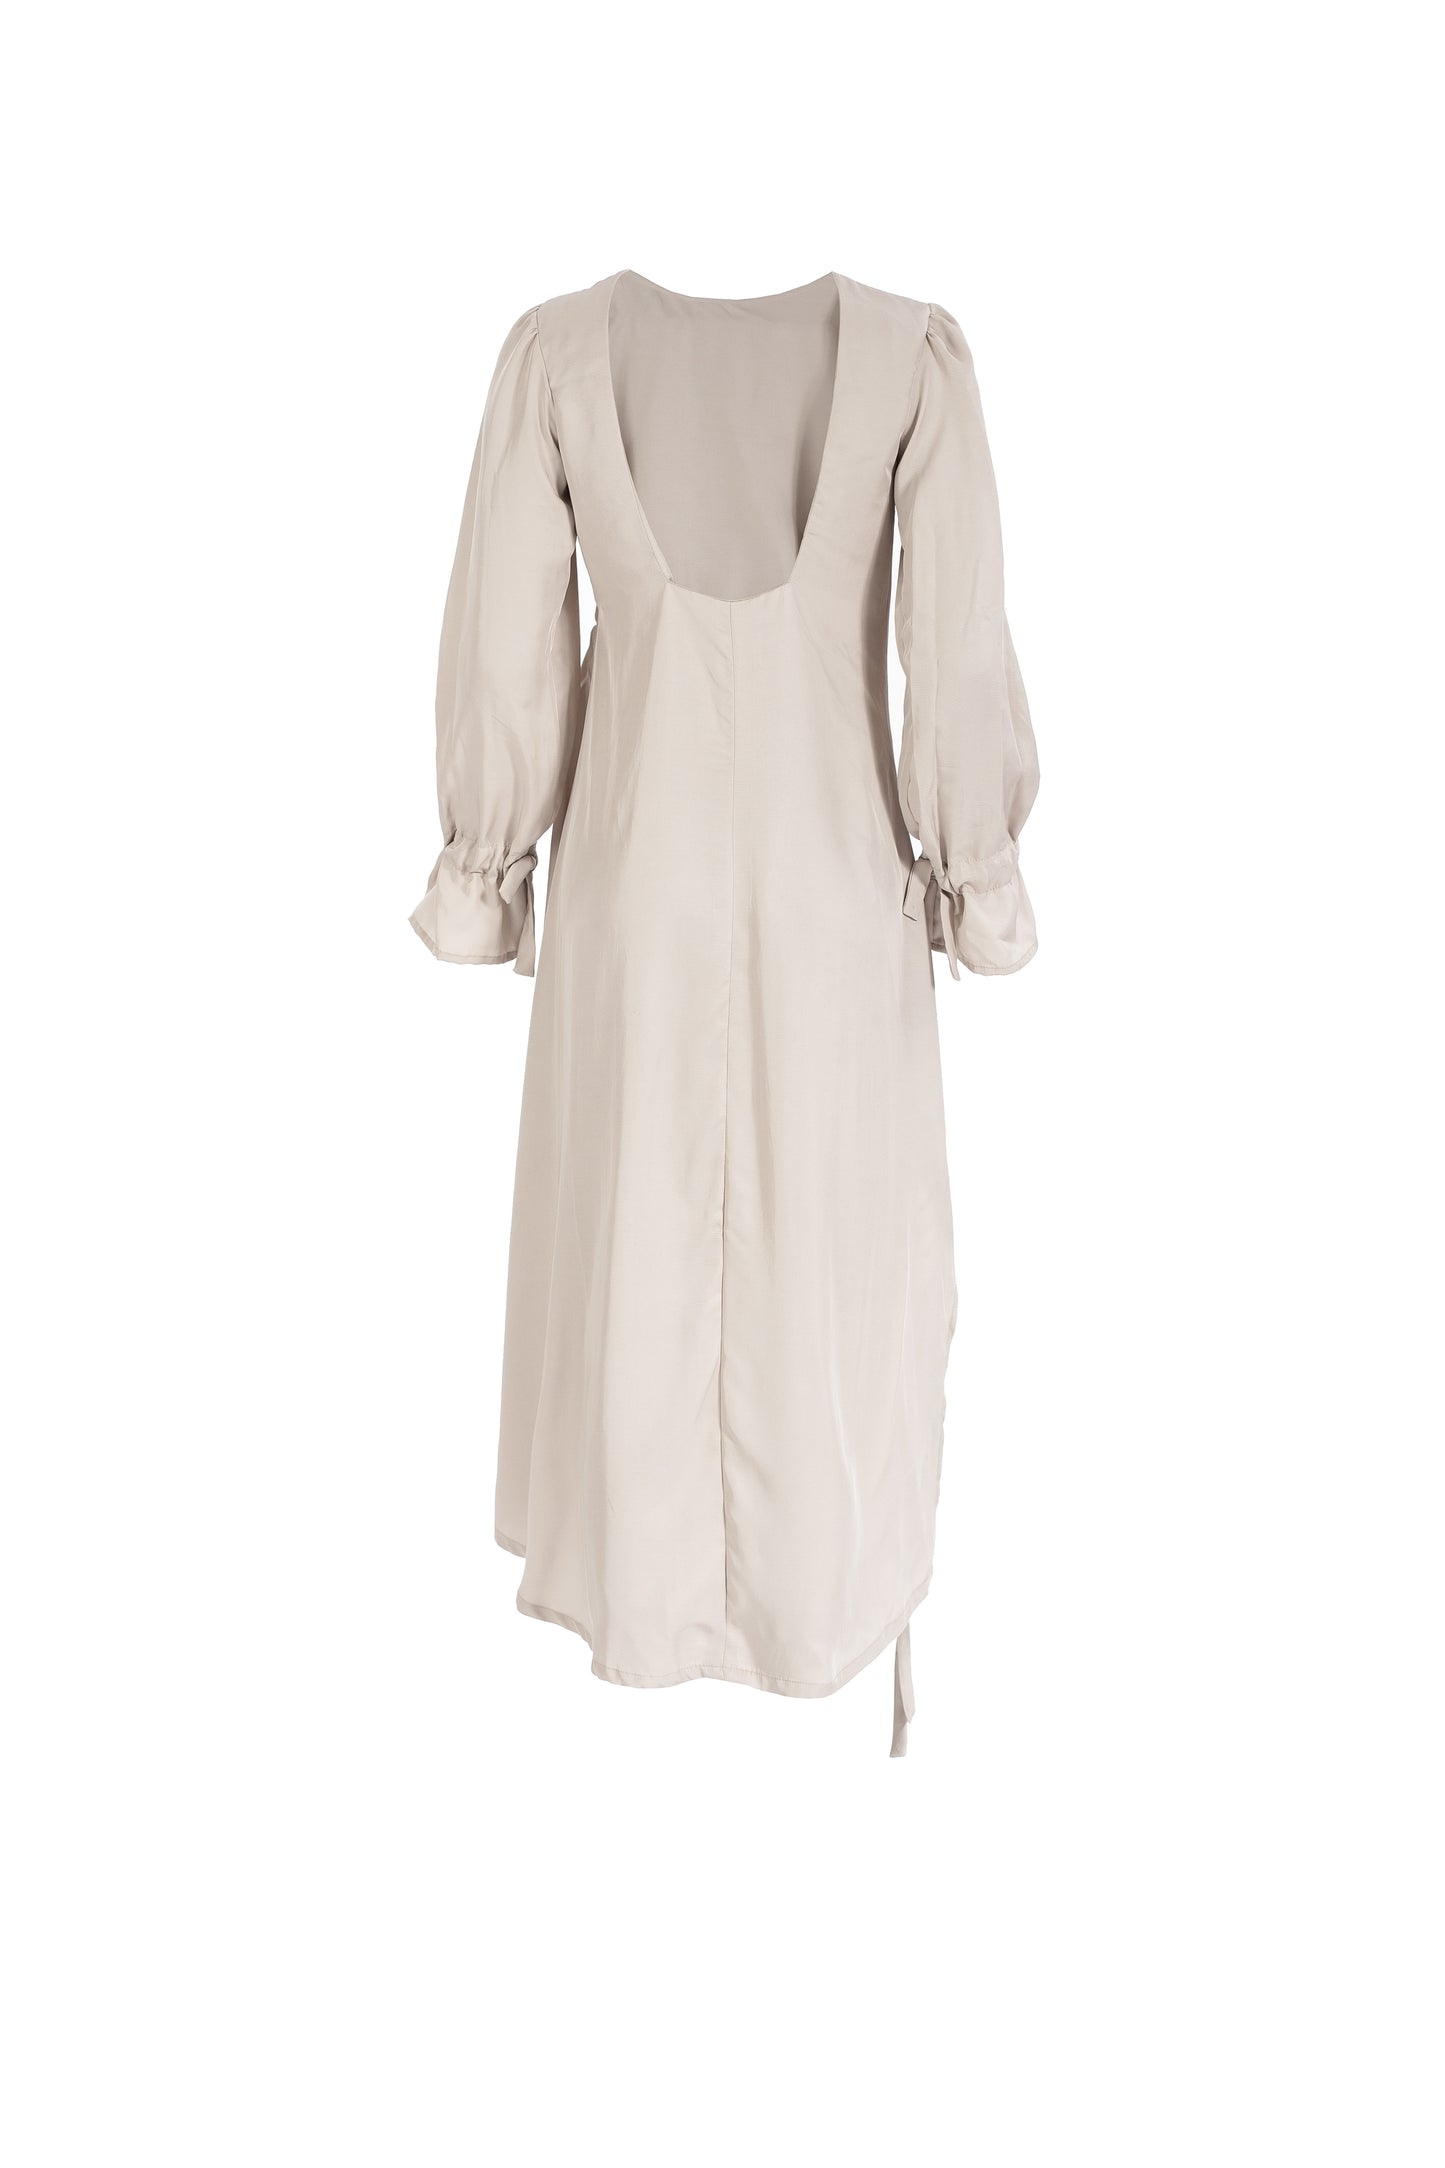 Hausse | robe coquille d'oeuf blanche